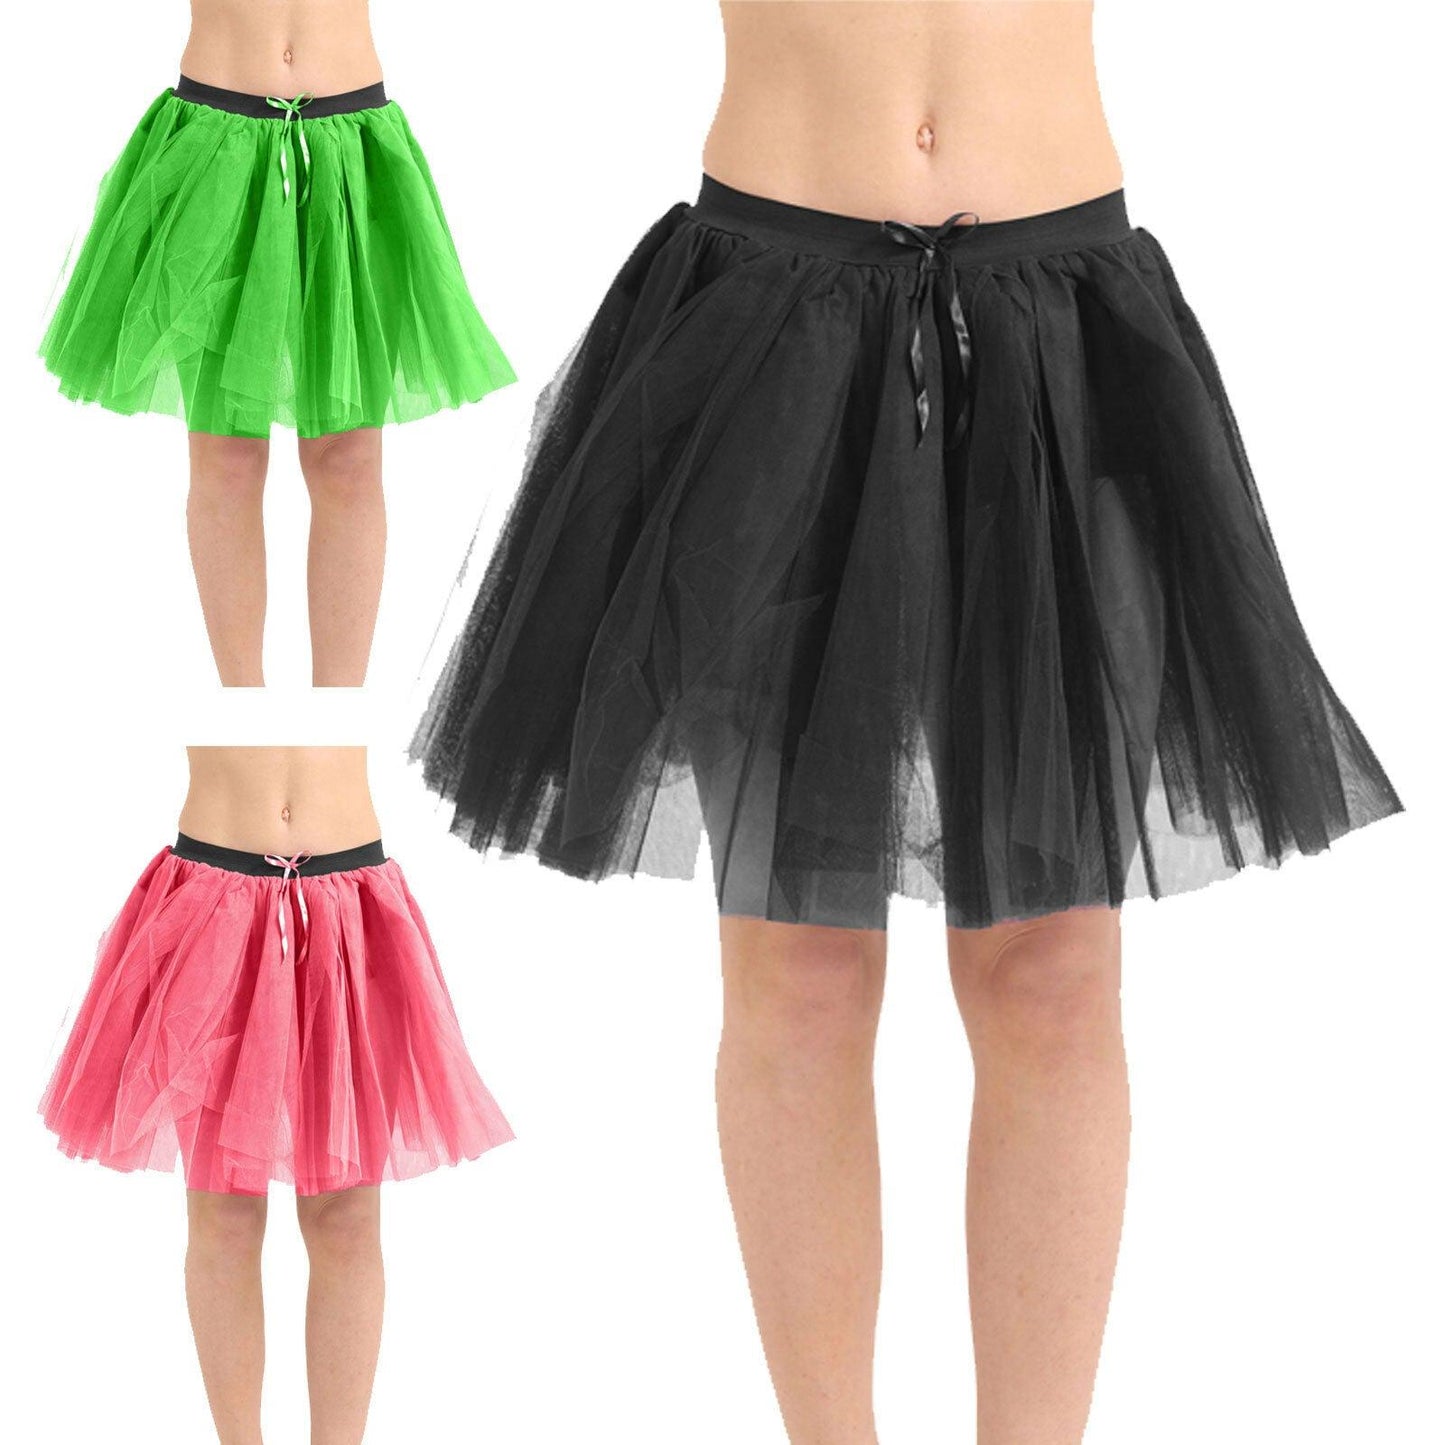 Ladies Girls 3 Layers 18 inches Tutu Skirt 80’s Hen Night Dance Wear Party Skirt - Labreeze